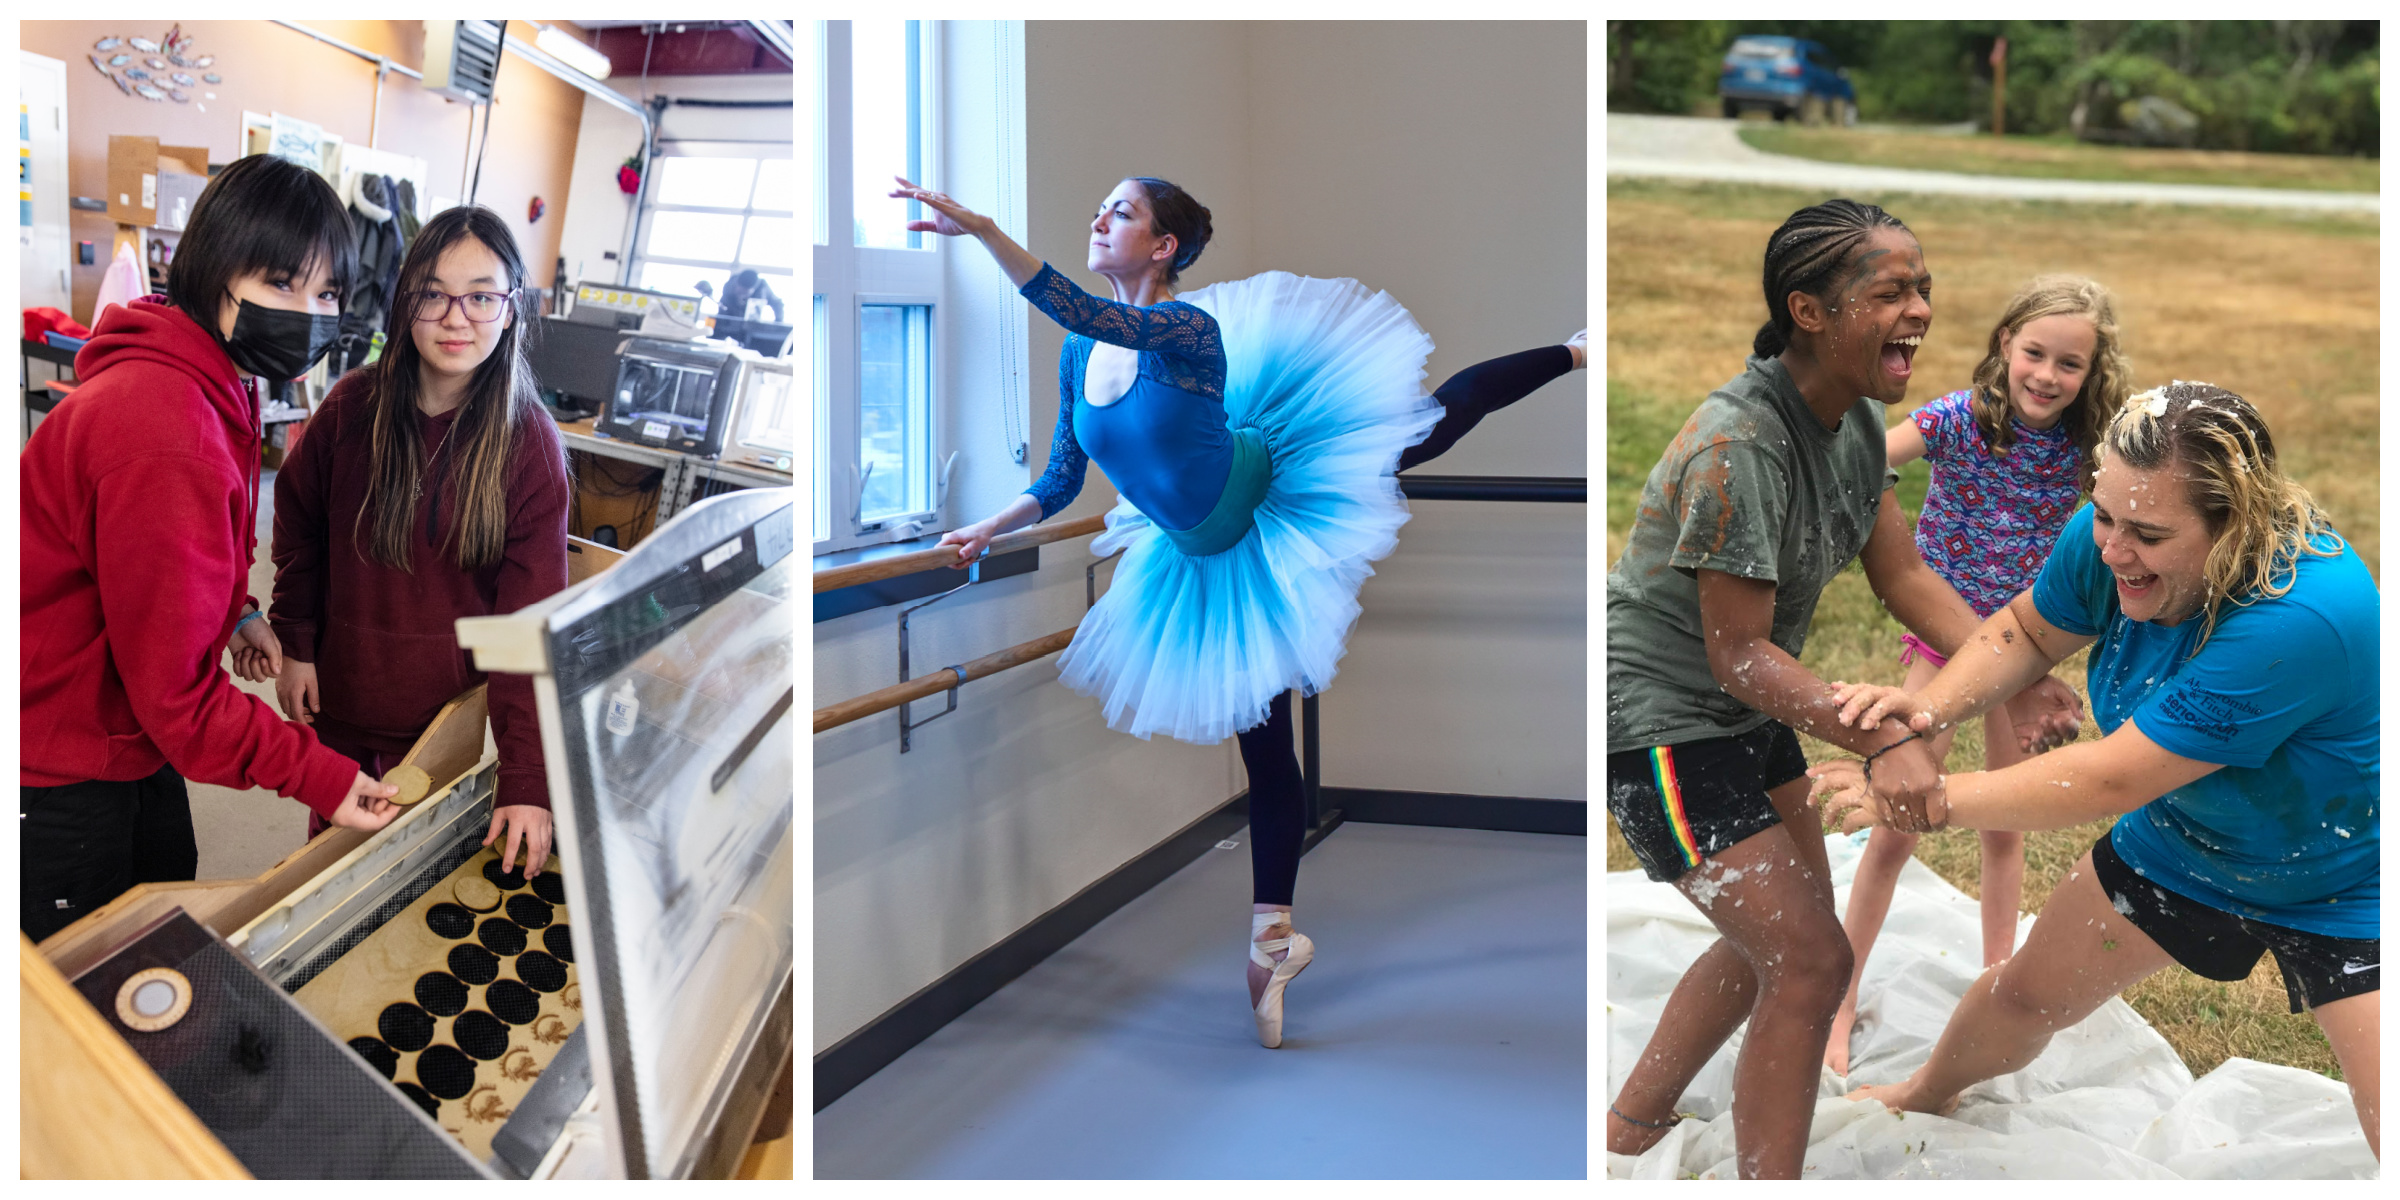 A collage of three grantee photos; two young people in a FabLab on the left; a ballerina in a studio in the middle; three girls playing at camp on the right.